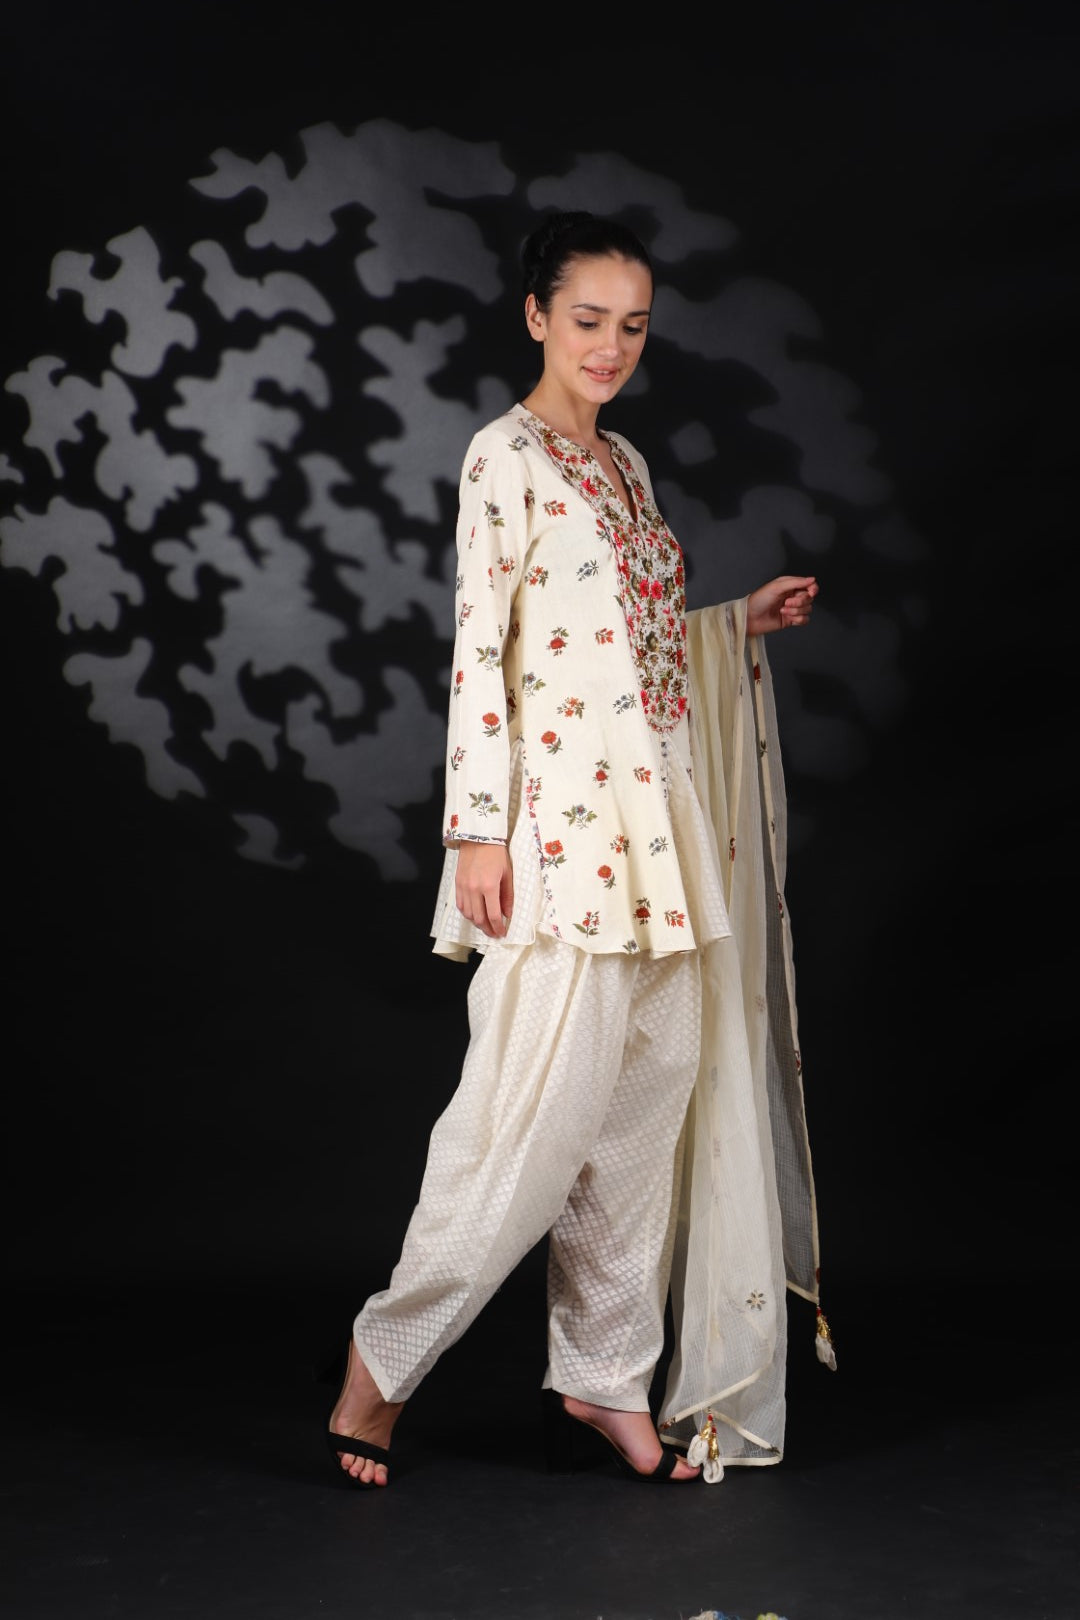 Lilly Off White Cotton Embroidered Yoke Kurta with Salwar and Dupatta